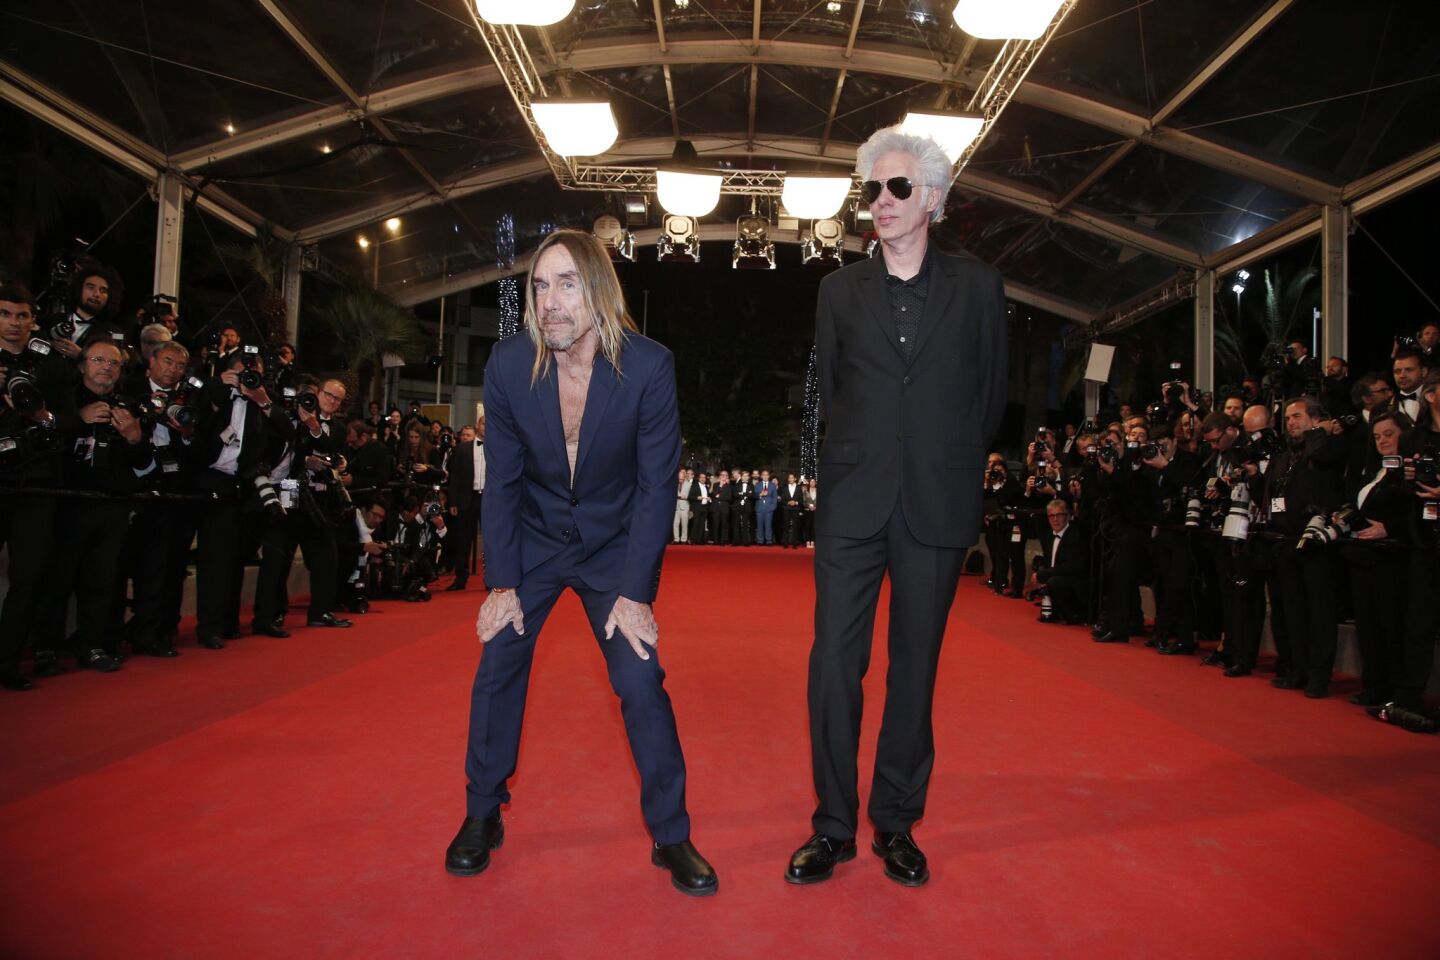 Singer Iggy Pop, left, and director Jim Jarmusch arrive at the screening of "Gimme Danger."